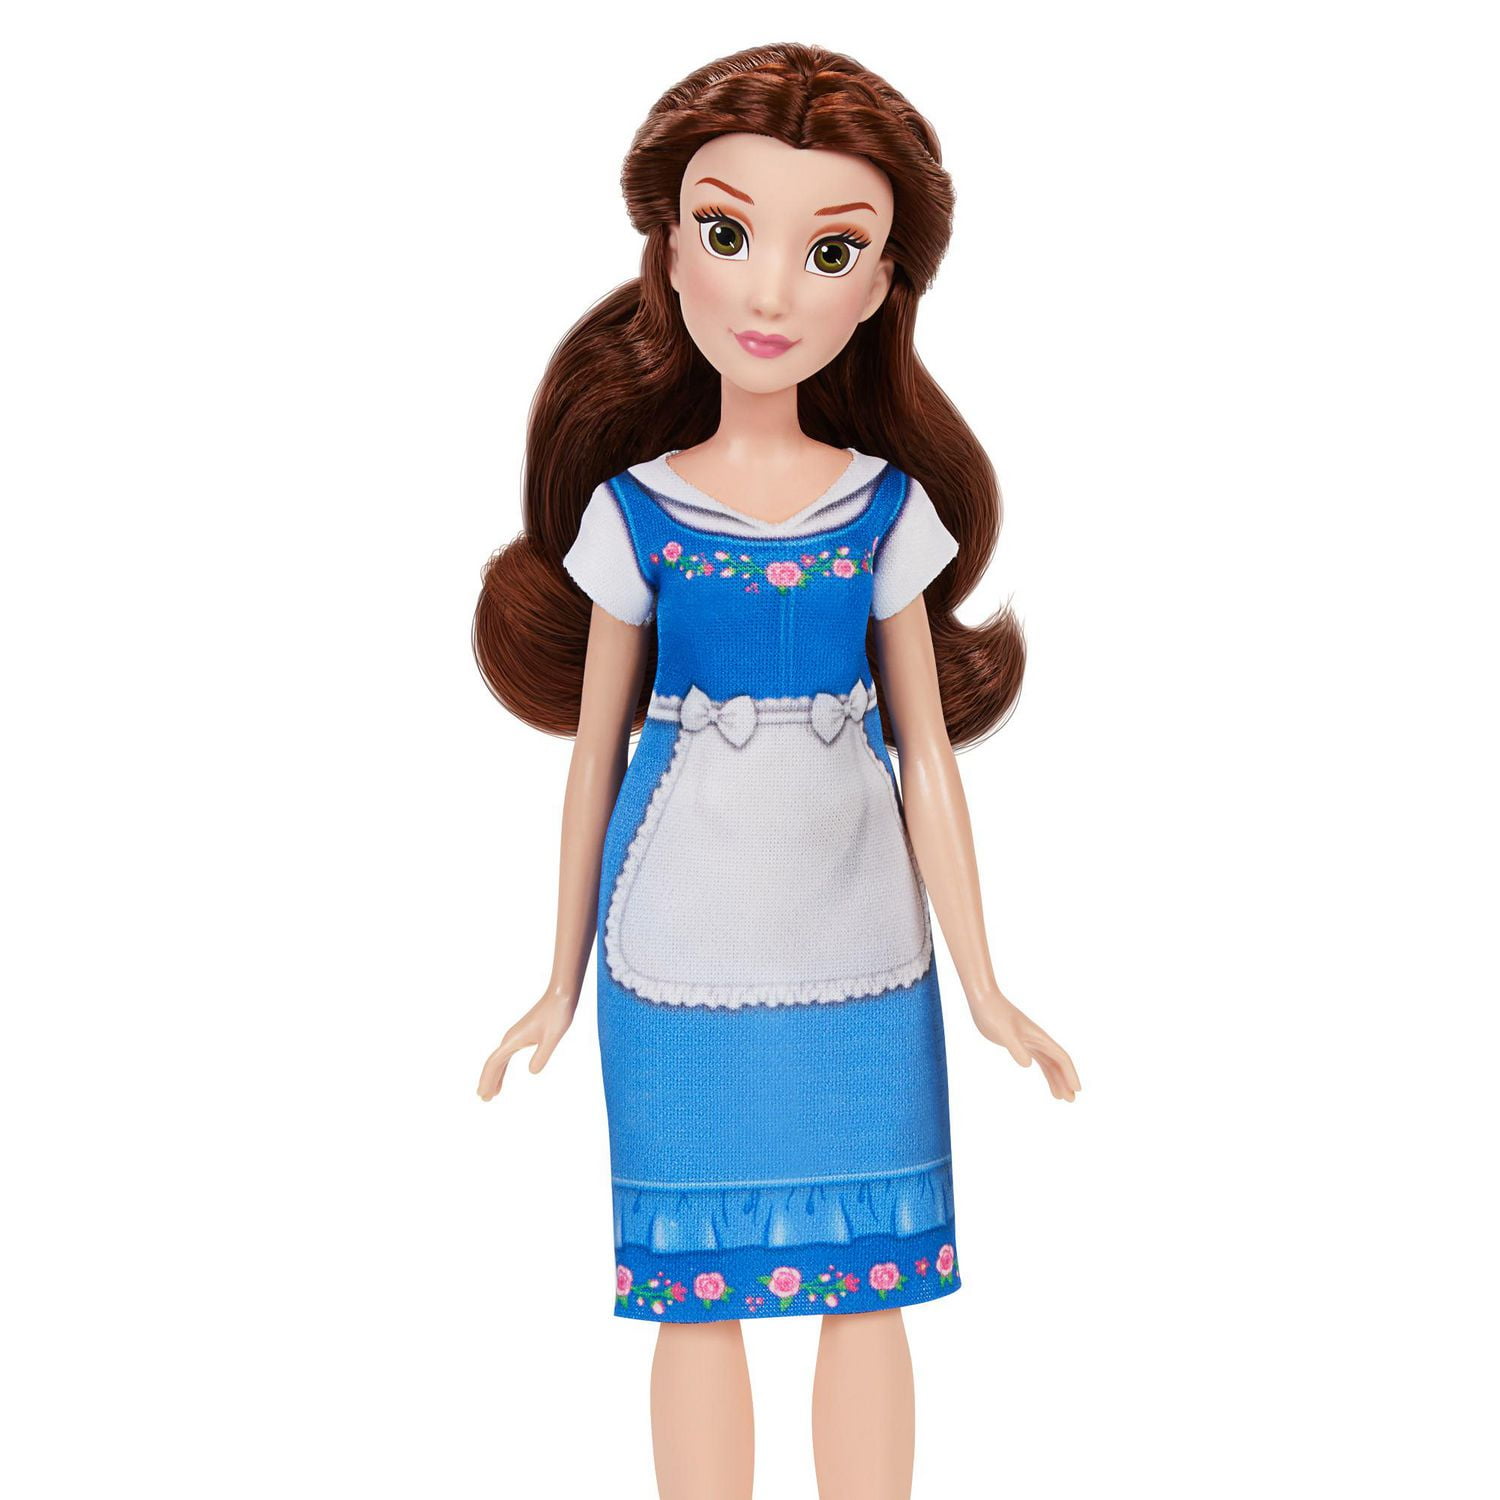 Disney Princess Belle and Wardrobe, Fashion Doll with Accessories